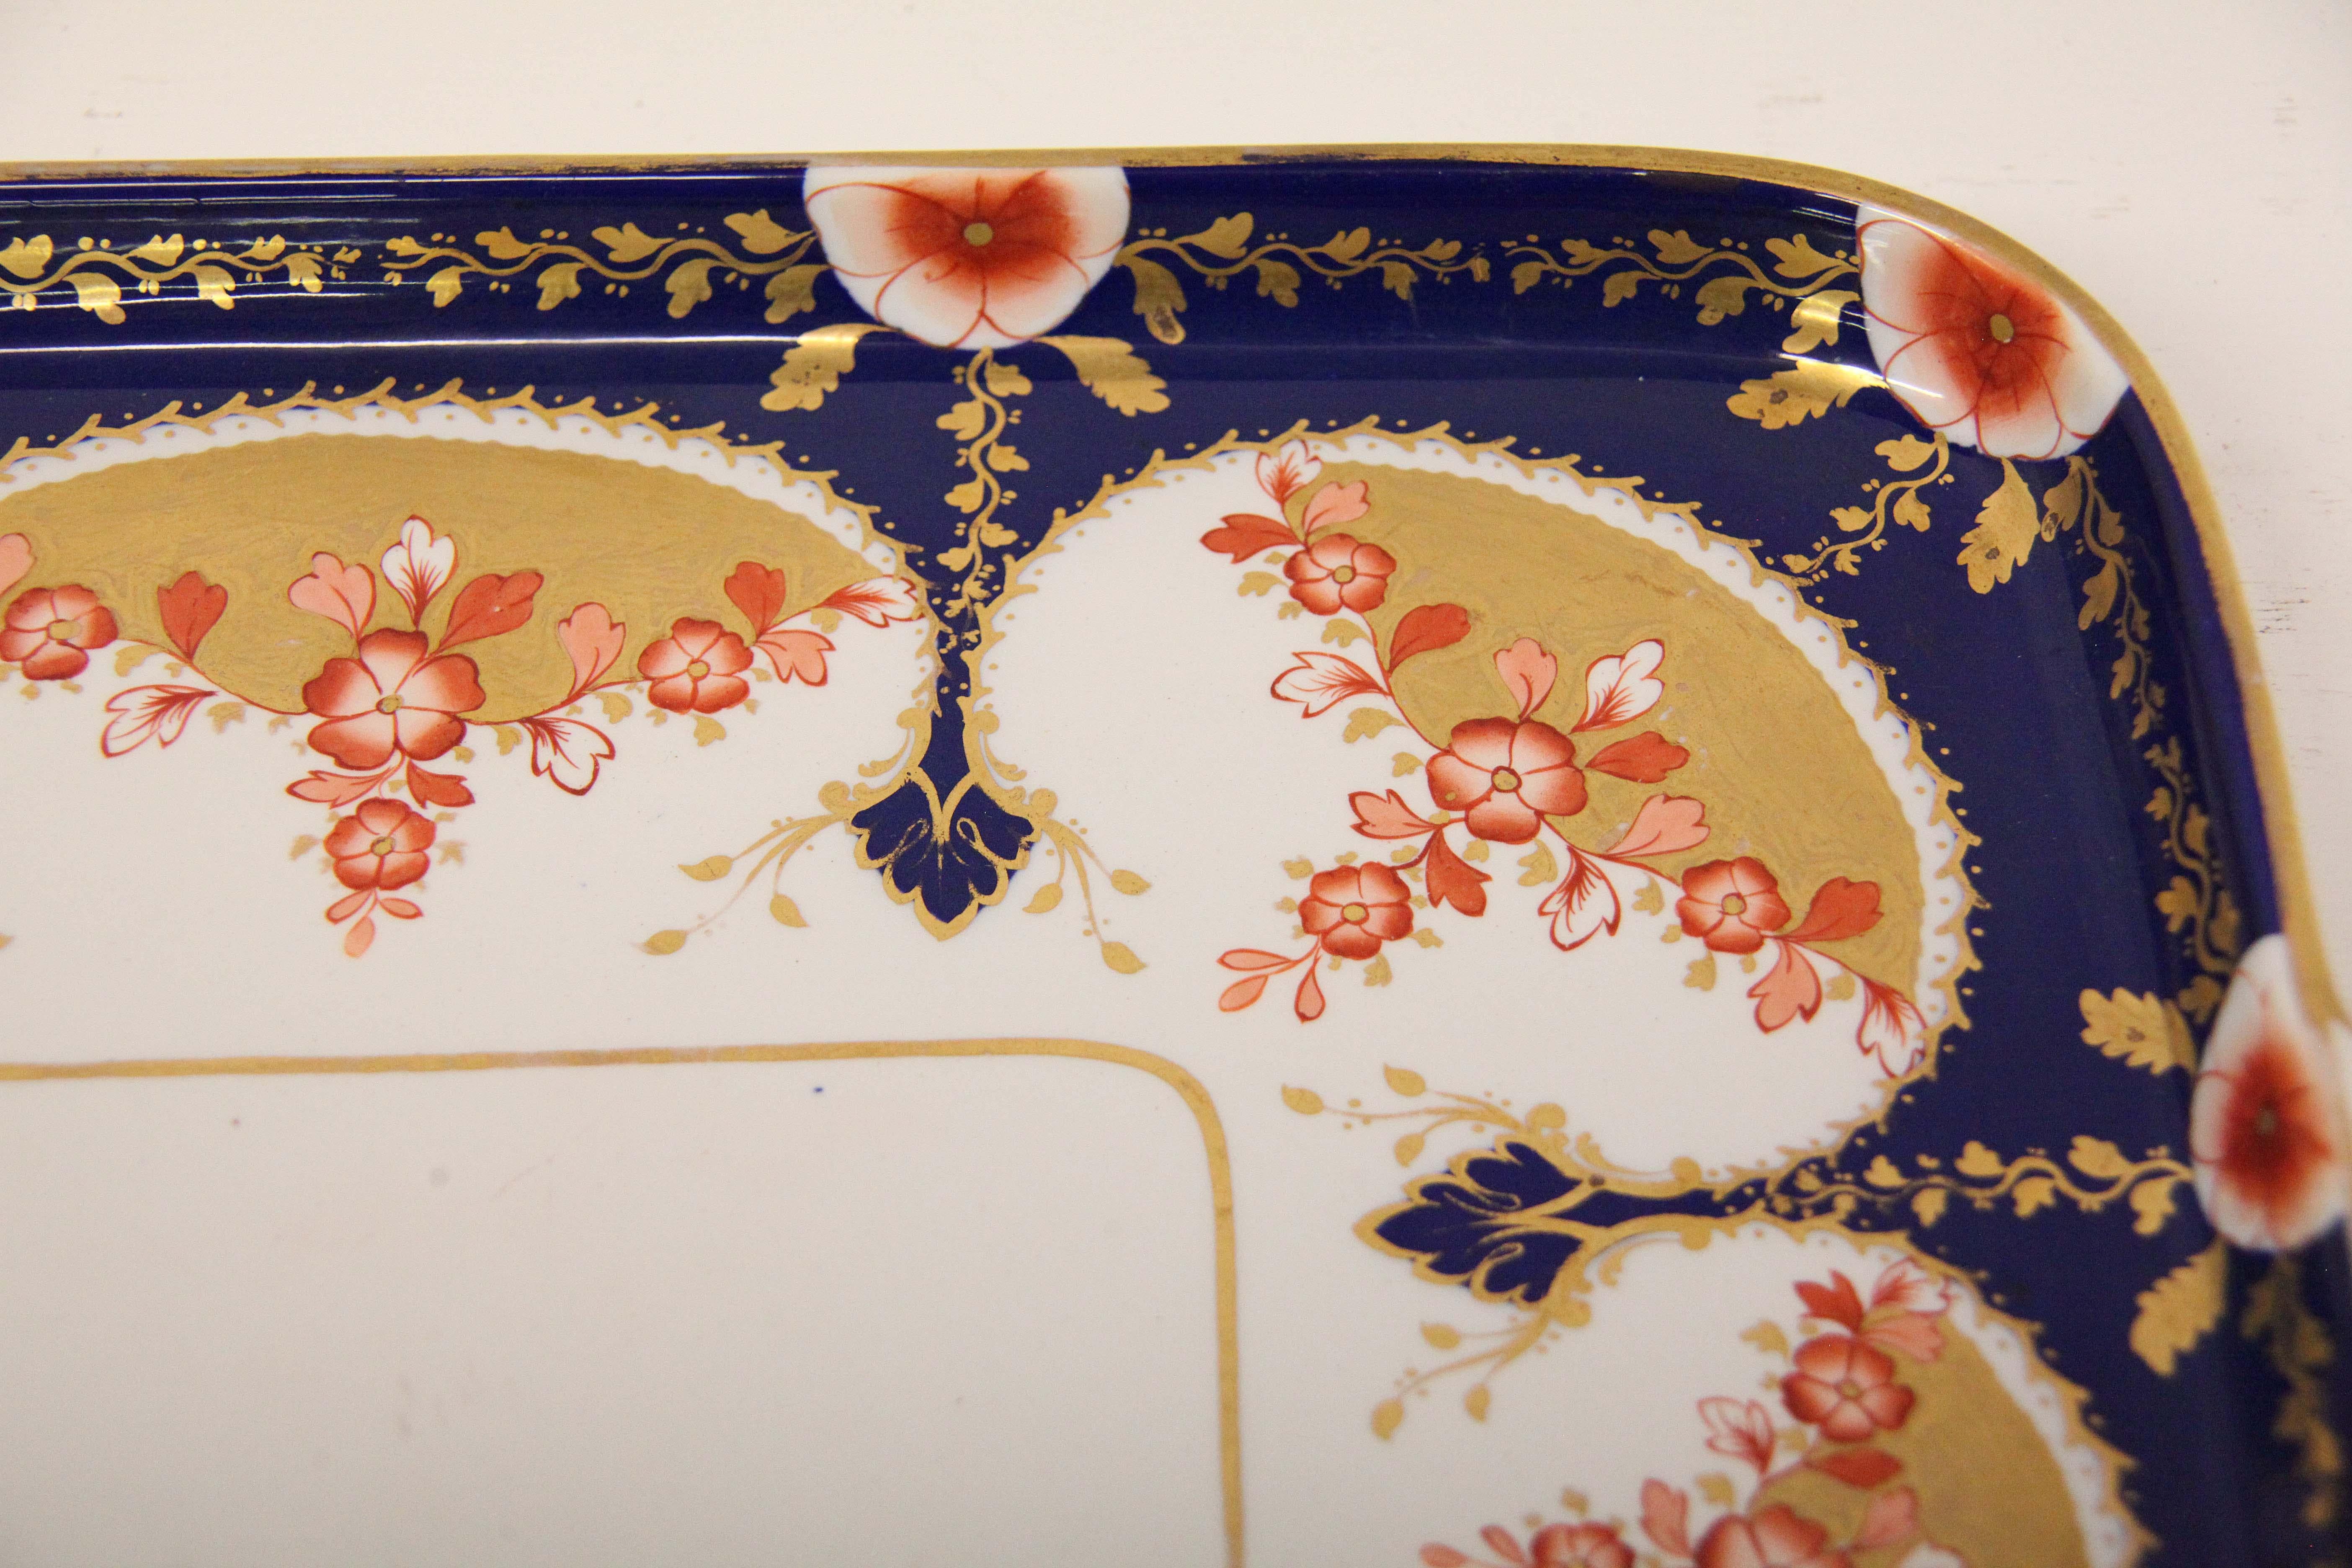 19th Century English Copeland Porcelain Serving Tray In Good Condition For Sale In Wilson, NC